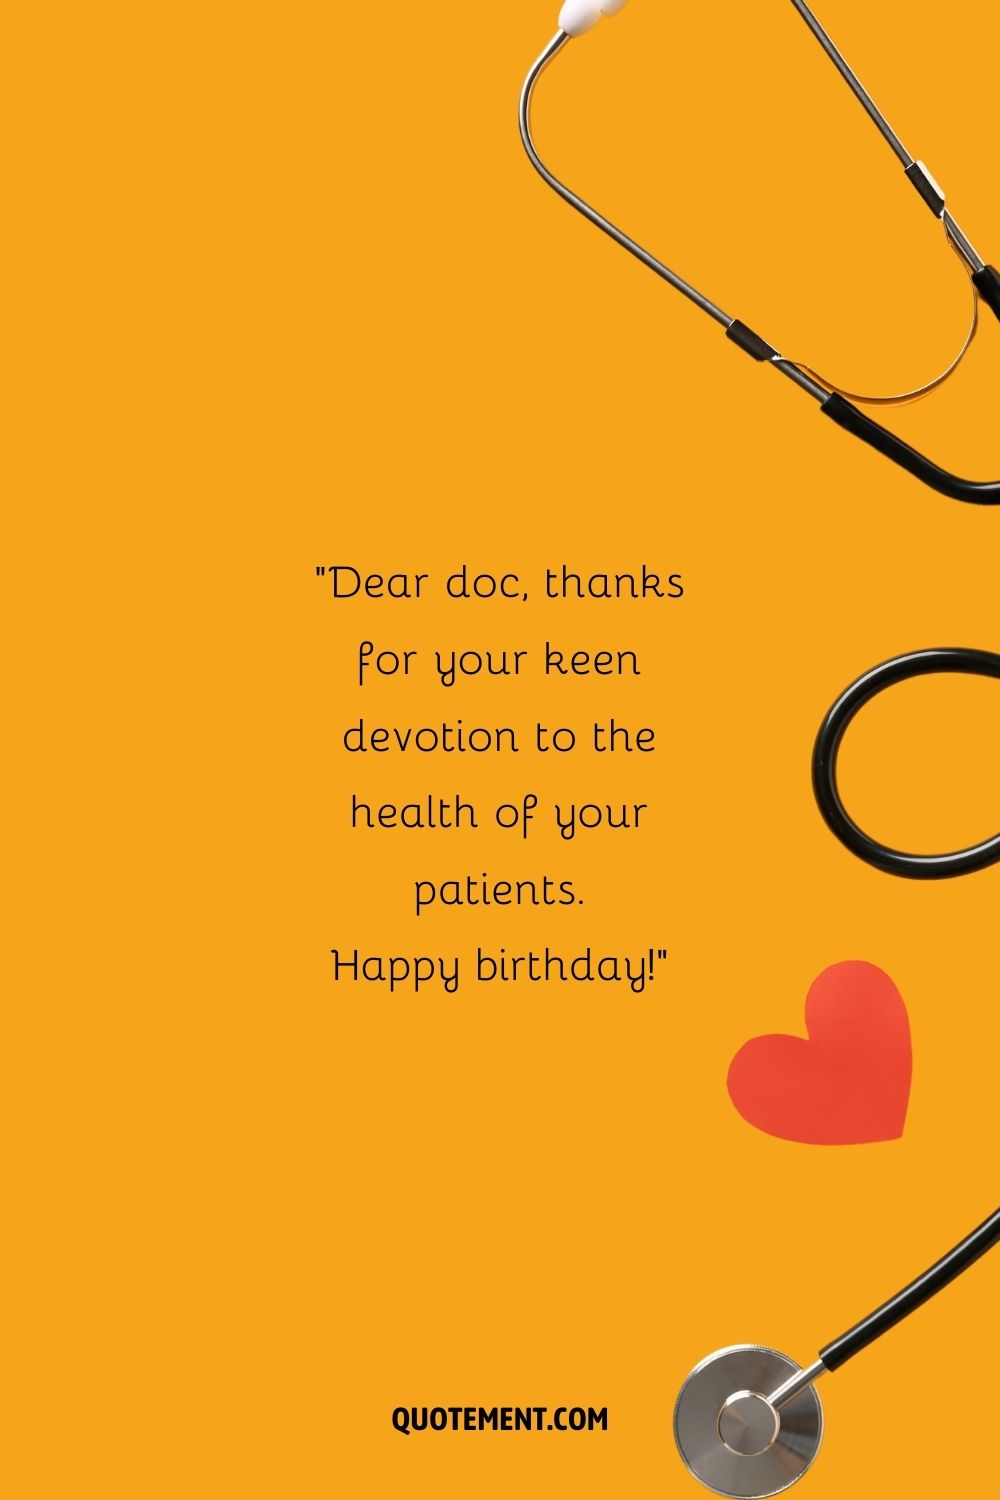 medical background equipment representing happy birthday doctor image